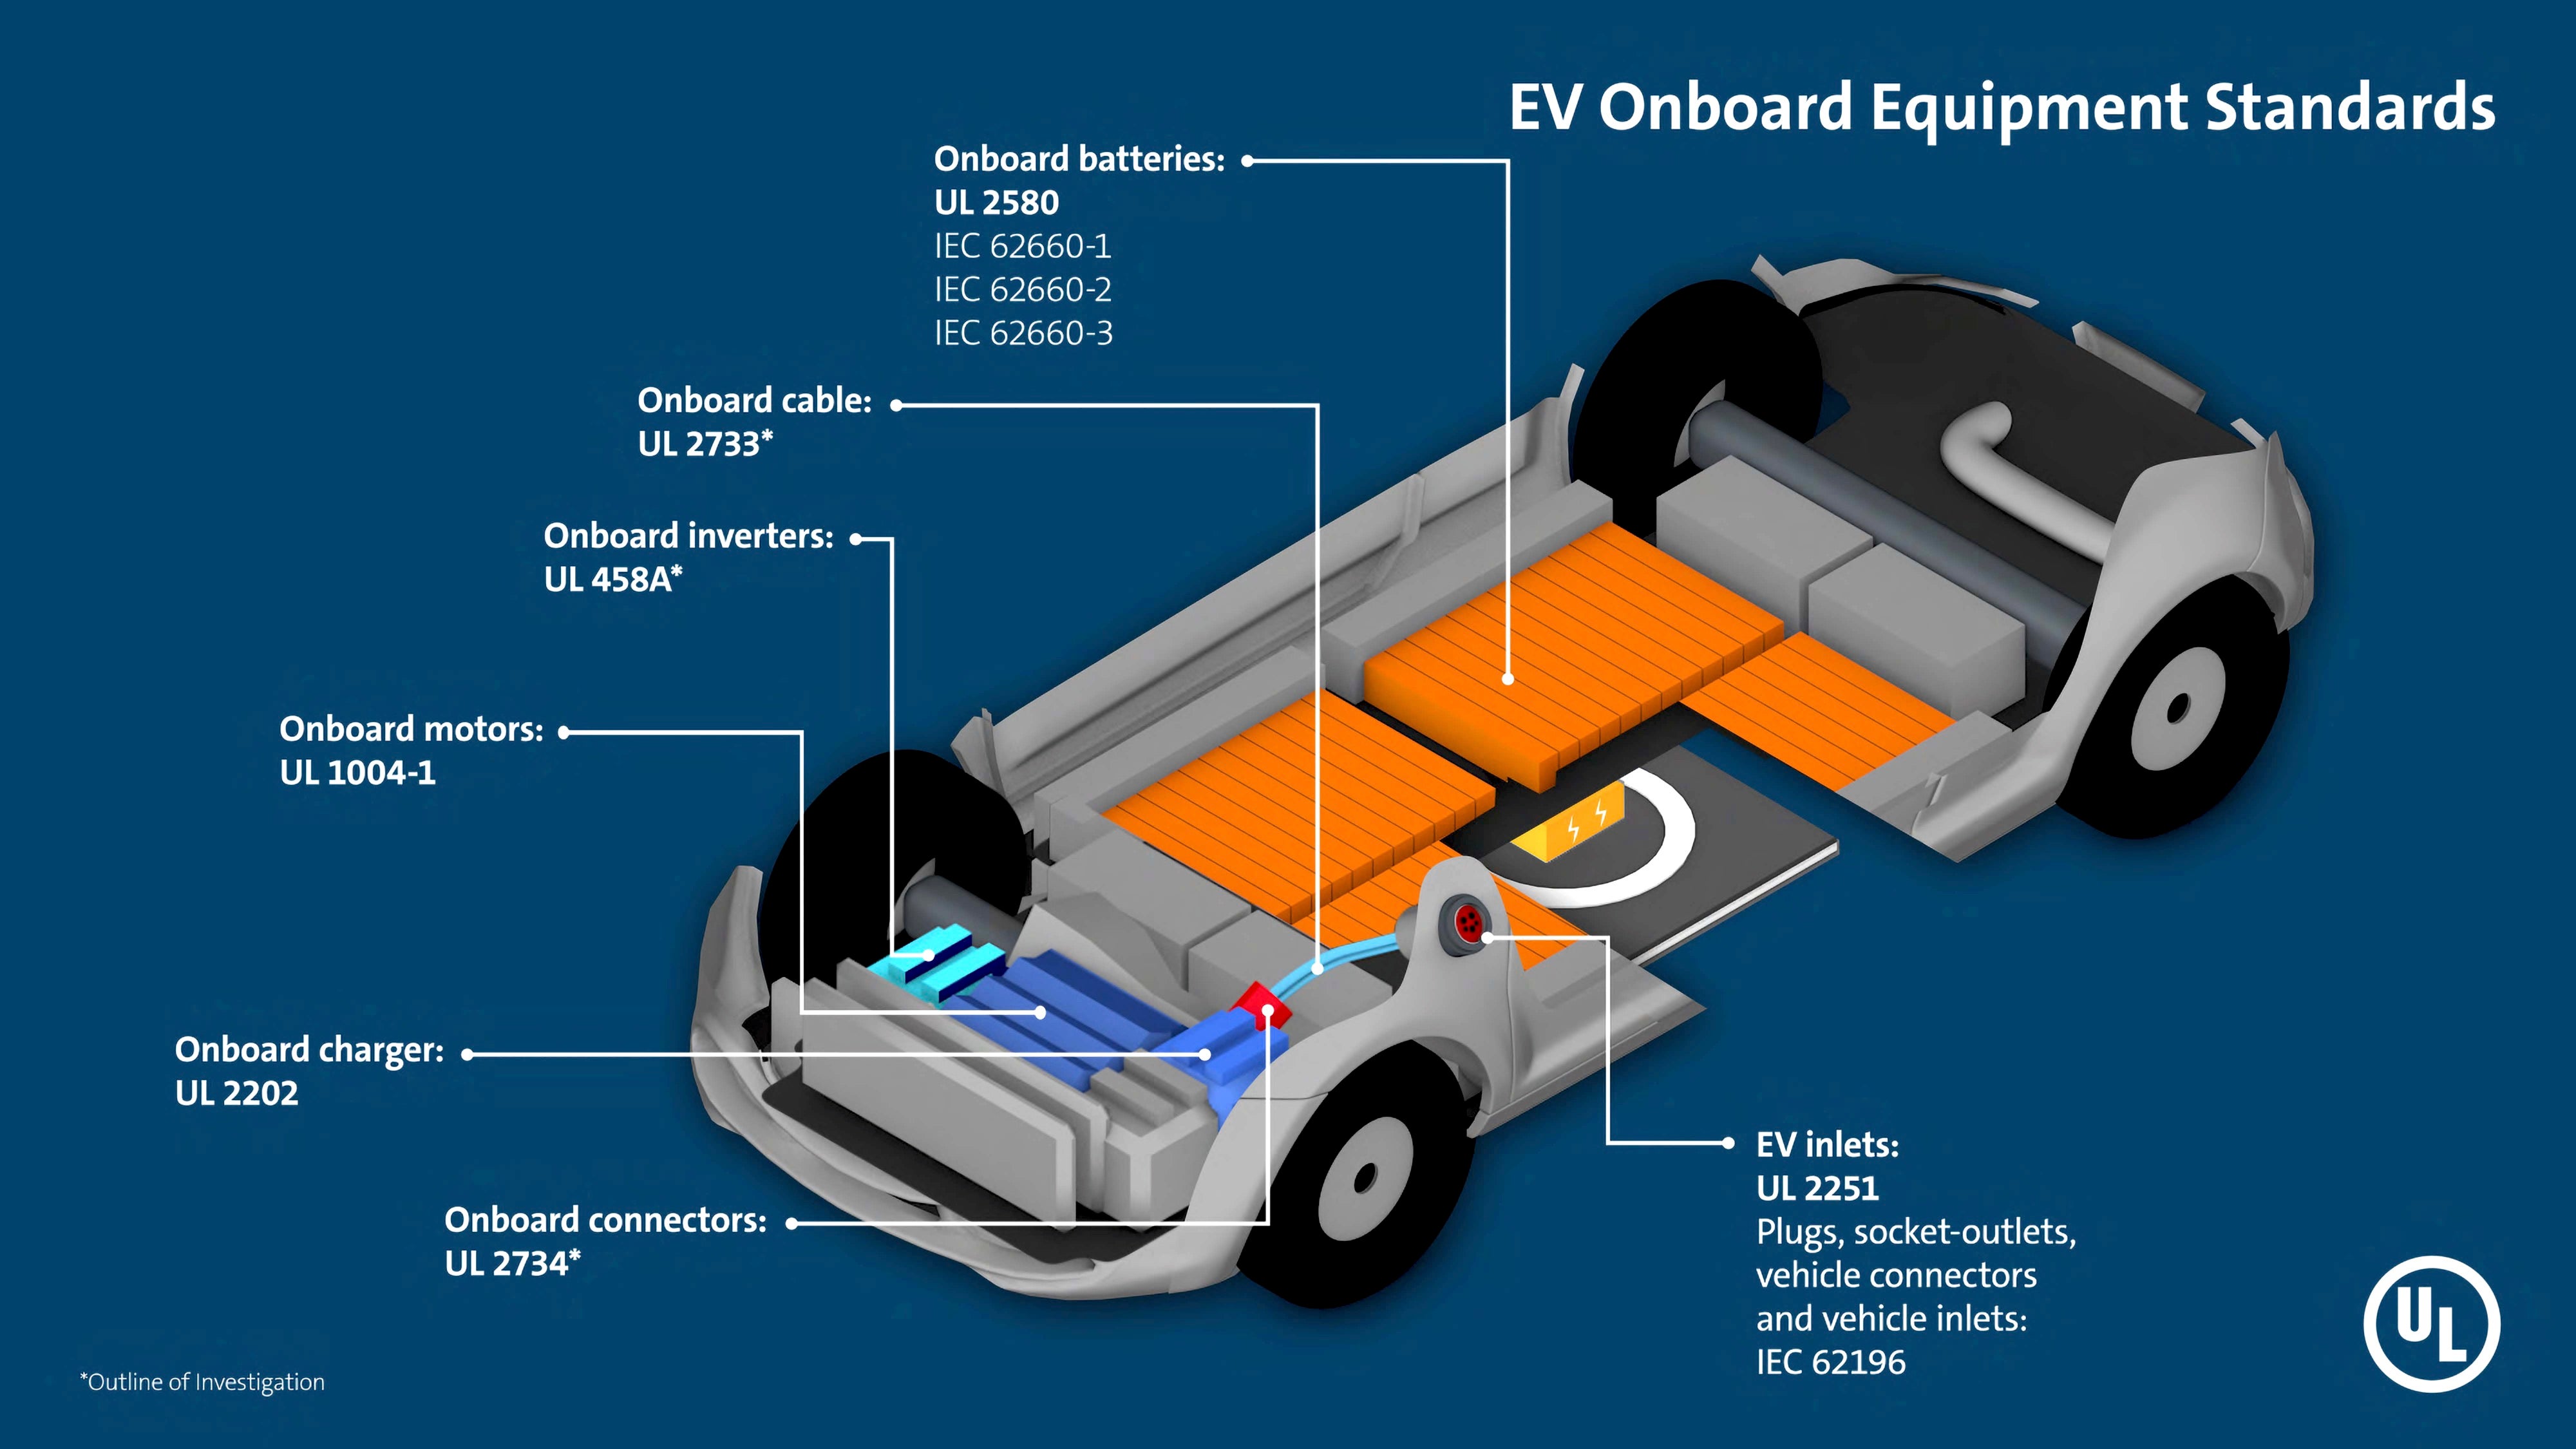 EV onboard equipment and charging standards infographic